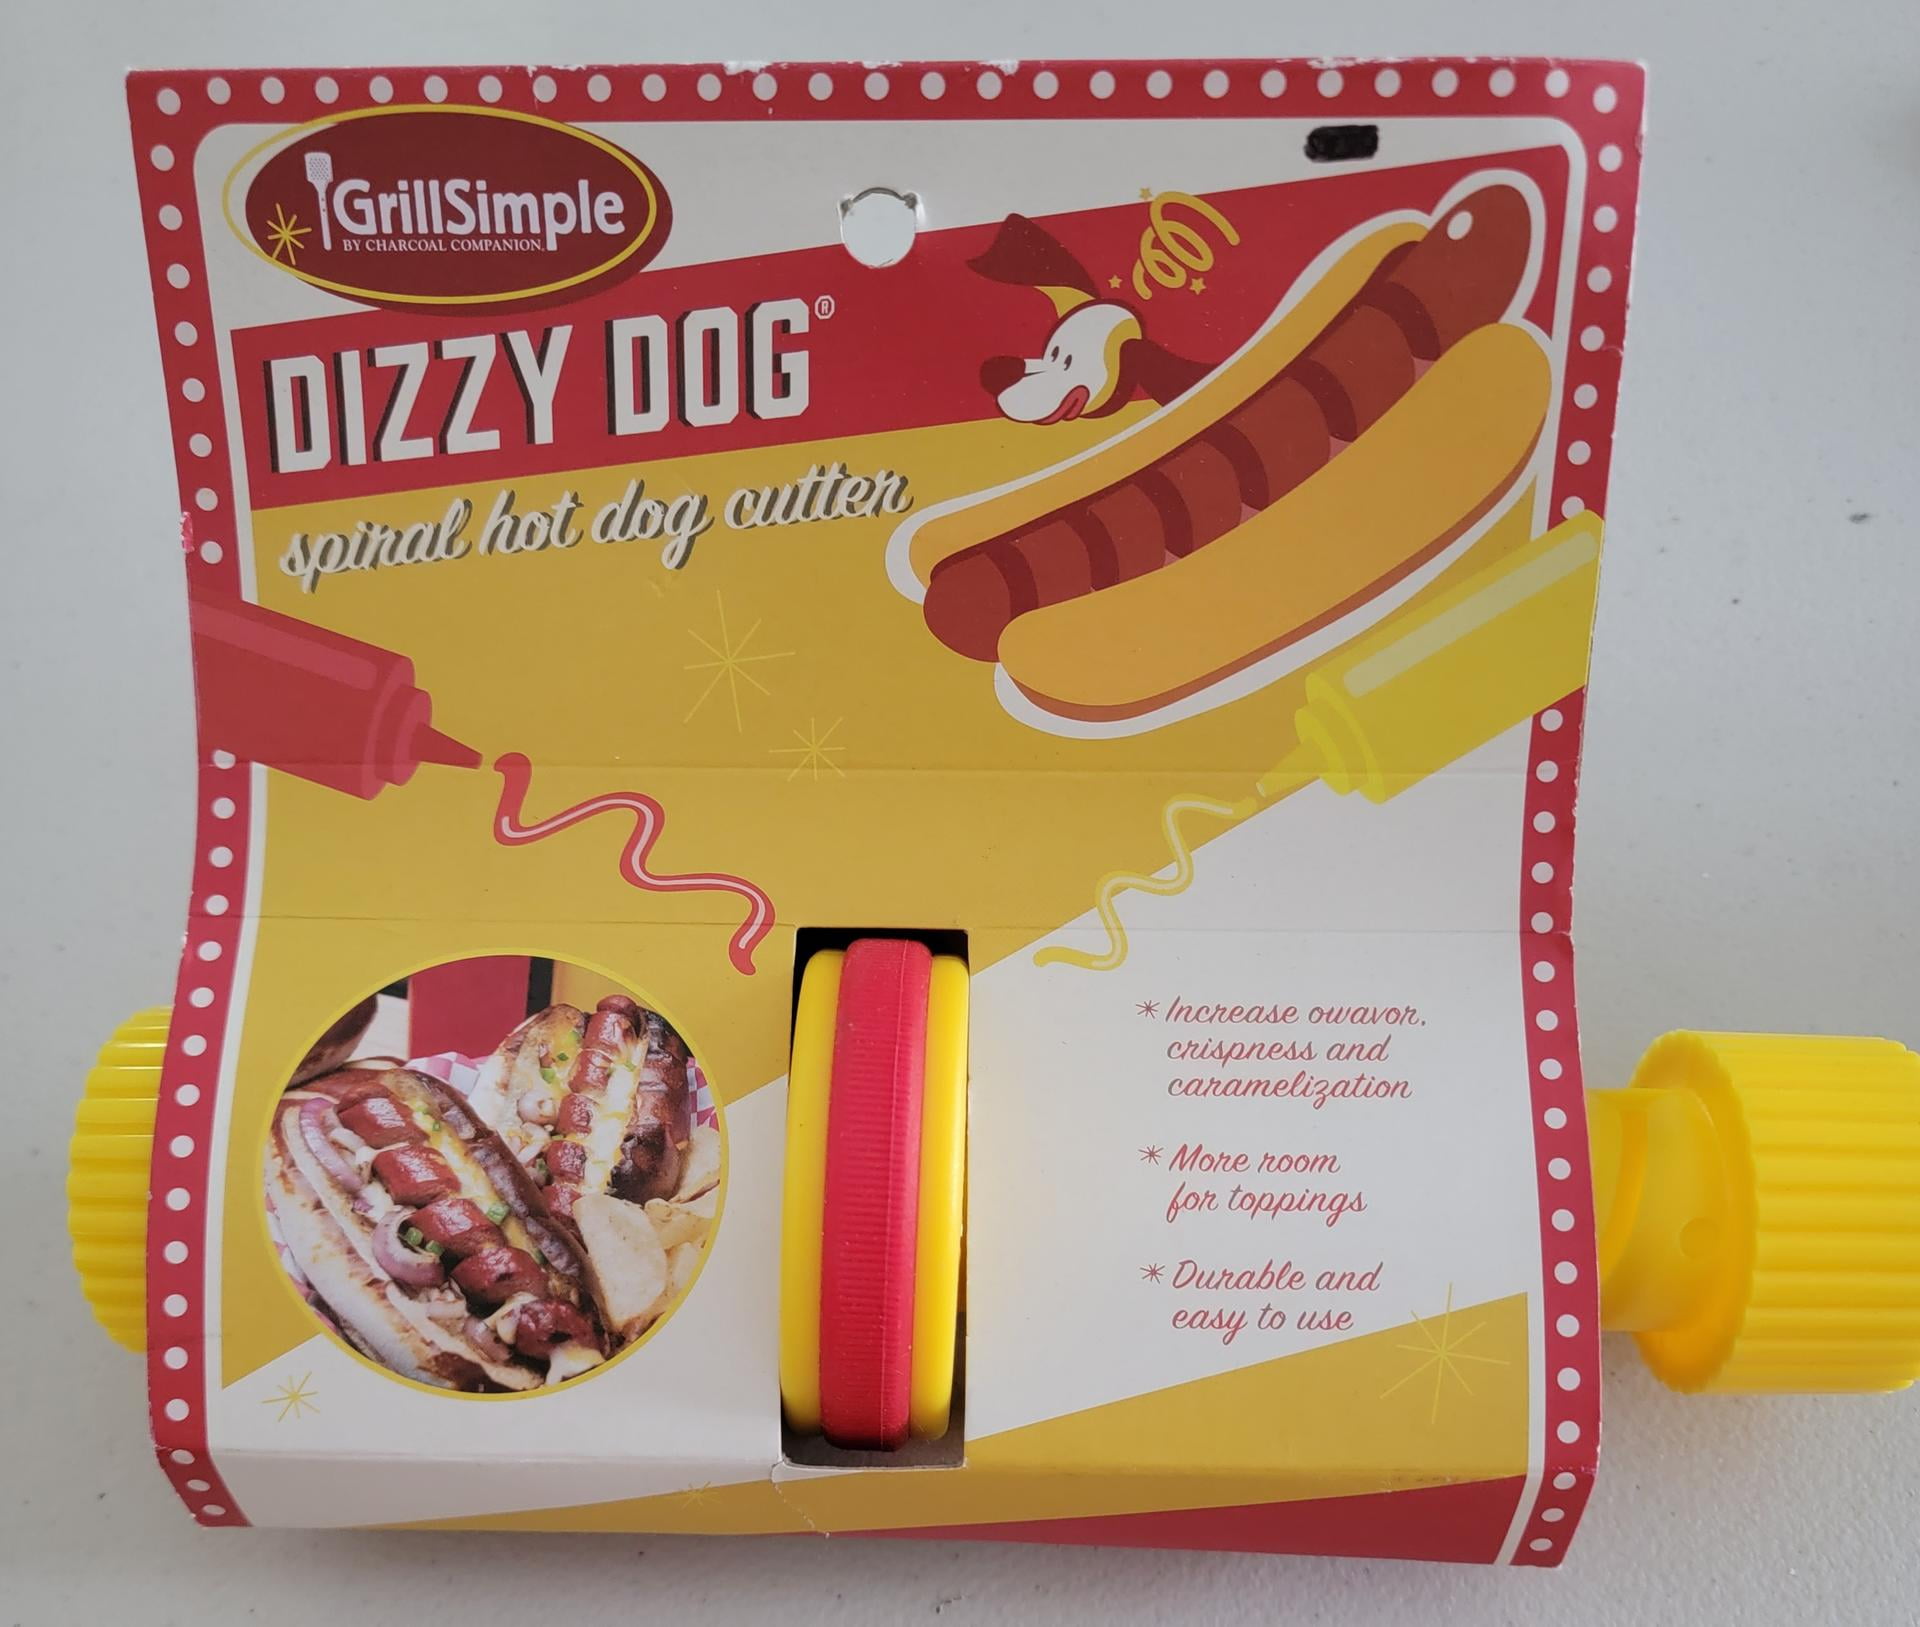 Spiral Cut Hot Dog Tool Review (And Other Single-Use Hot Dog Tools